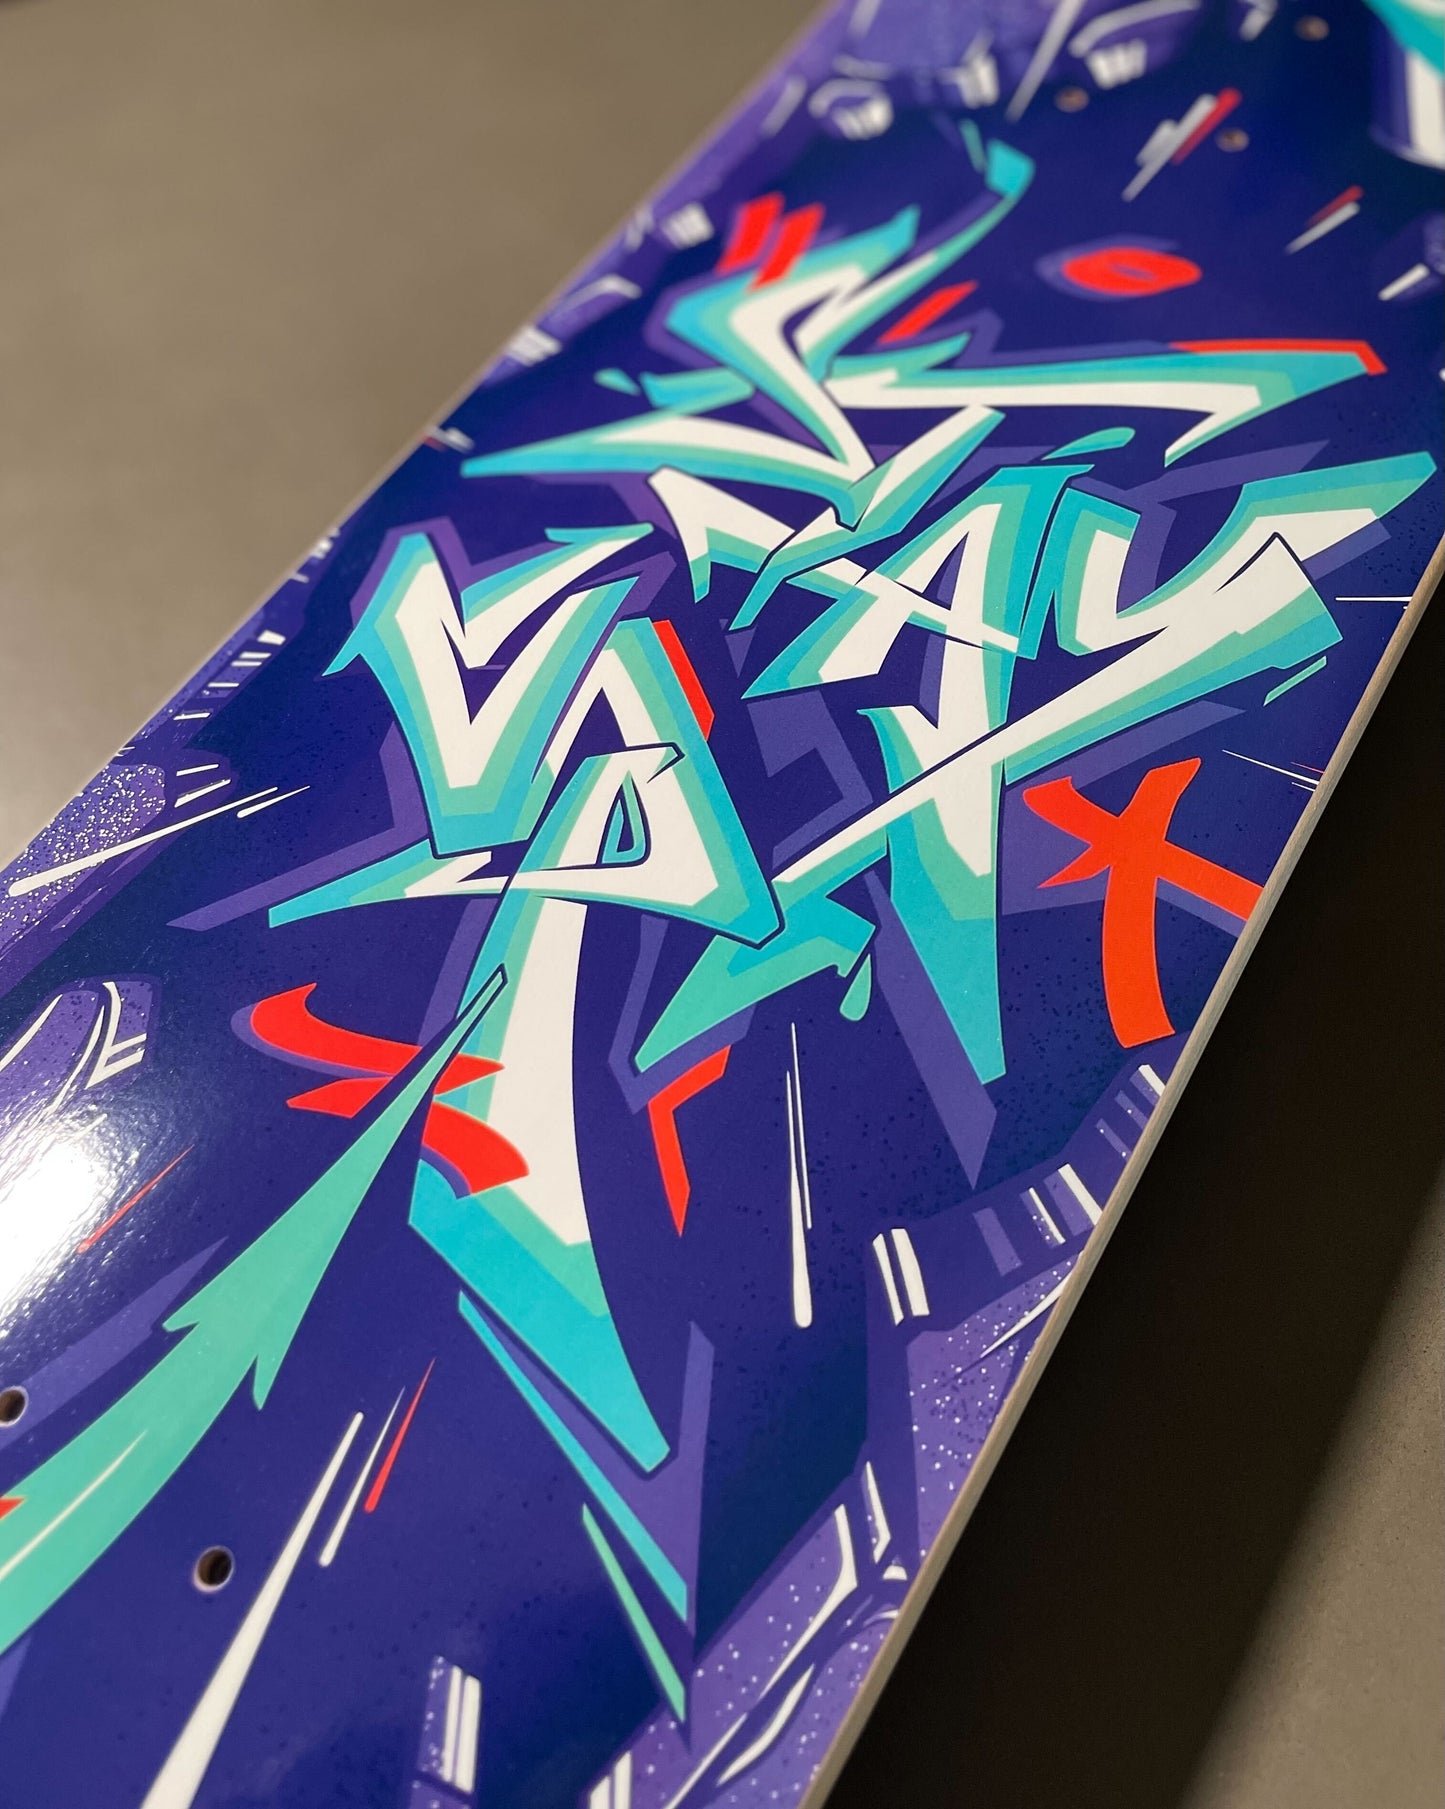 Stay Up Deck - 8.25"